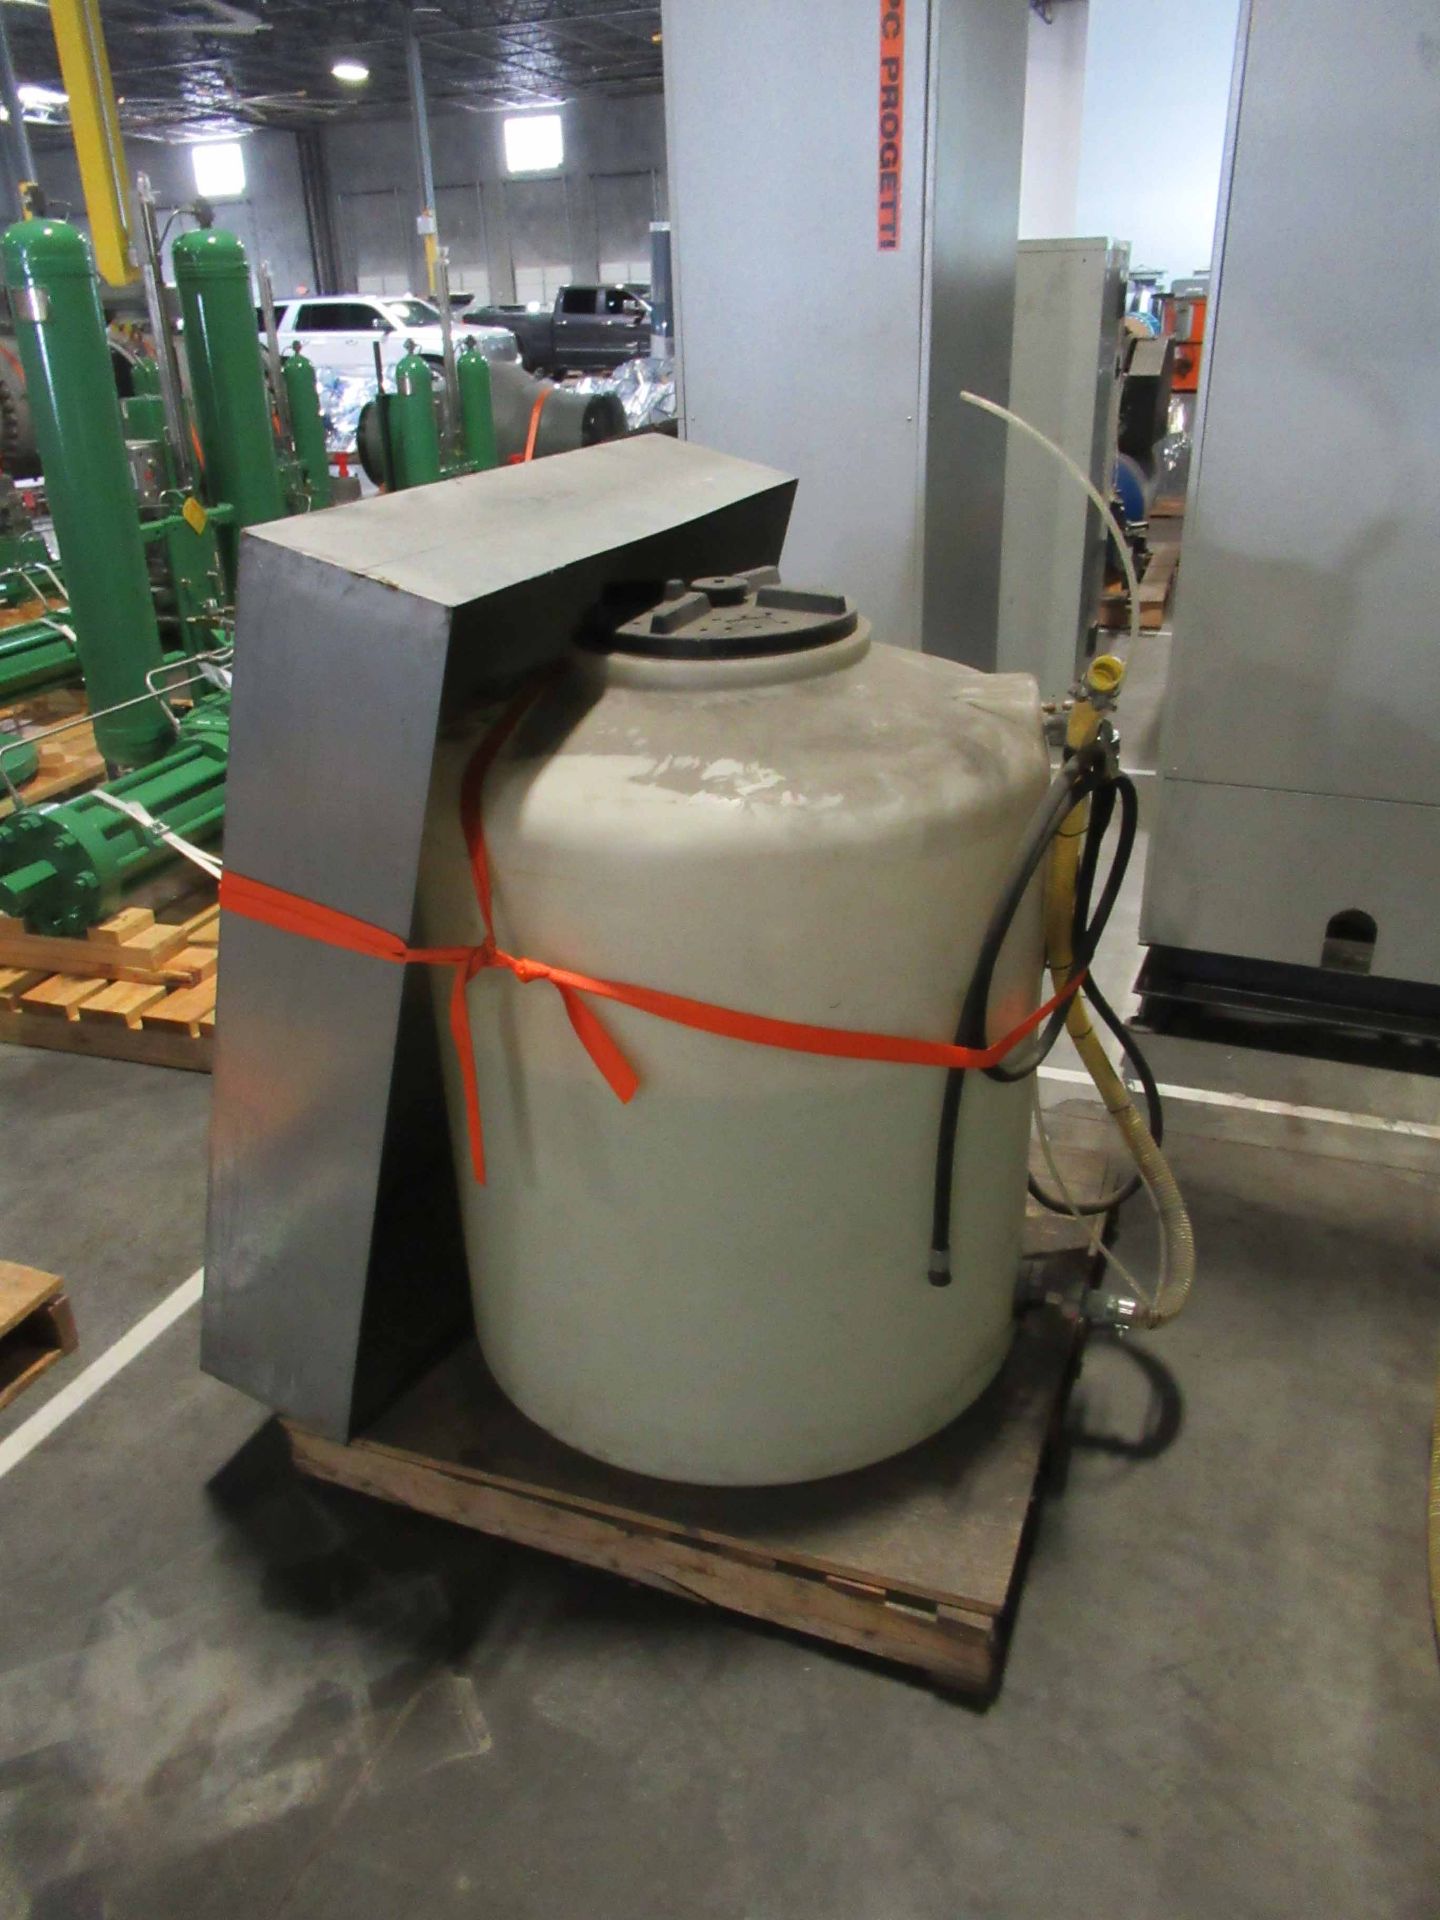 PRESSURE SAFETY VALVE TEST RIG, PC PROGETTI MDL. BV-M/60, new 2016, 60 T. reaction force, 33.9" max. - Image 5 of 10